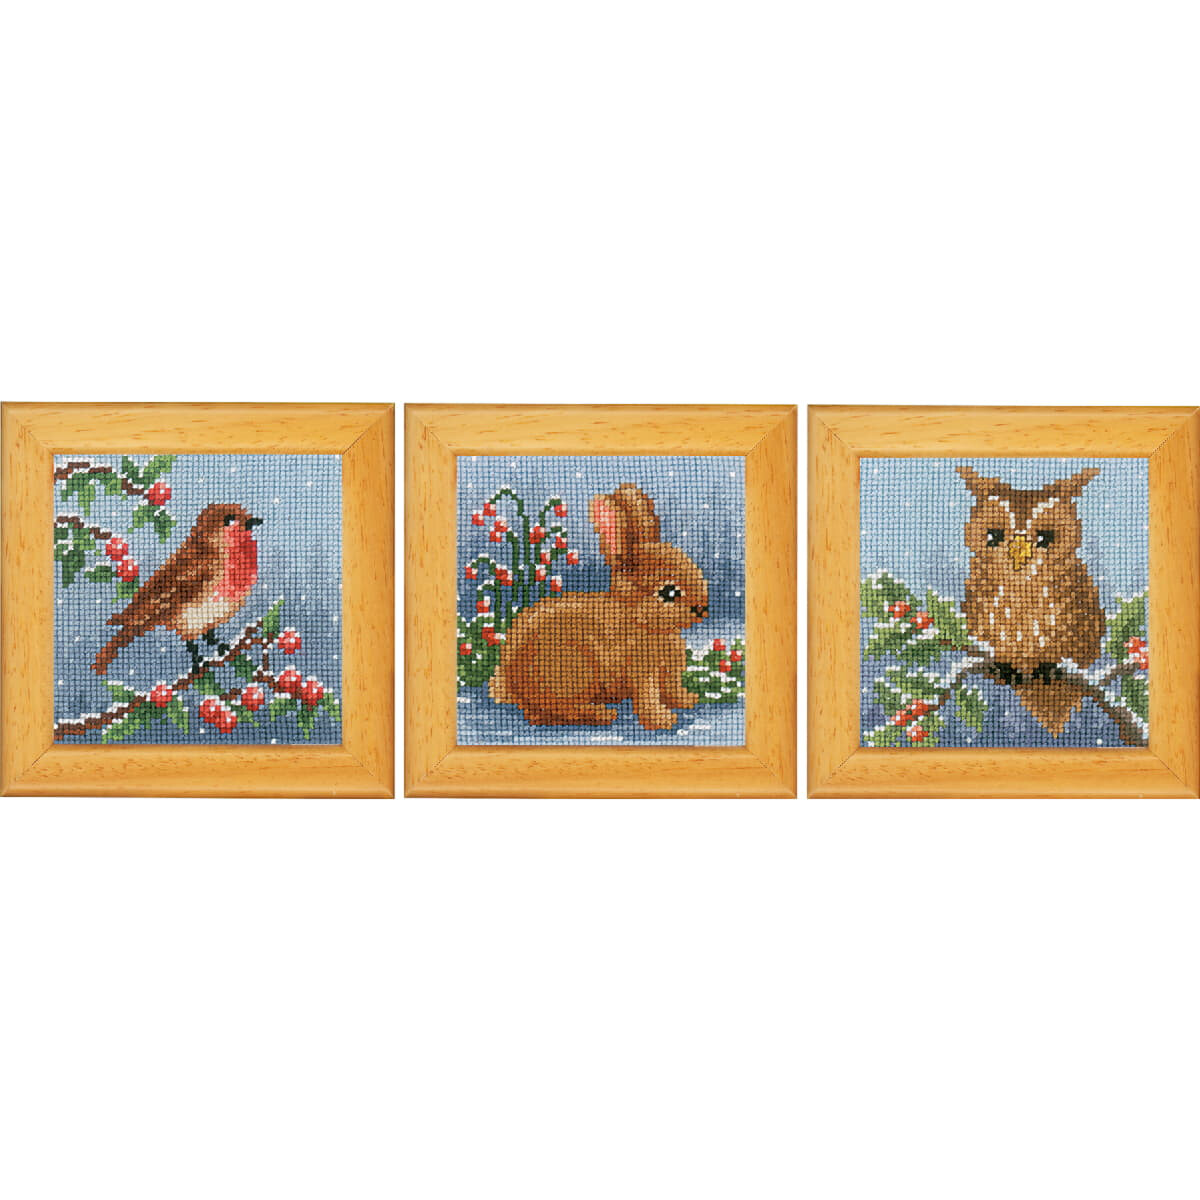 Vervaco counted cross stitch kit "Winter...